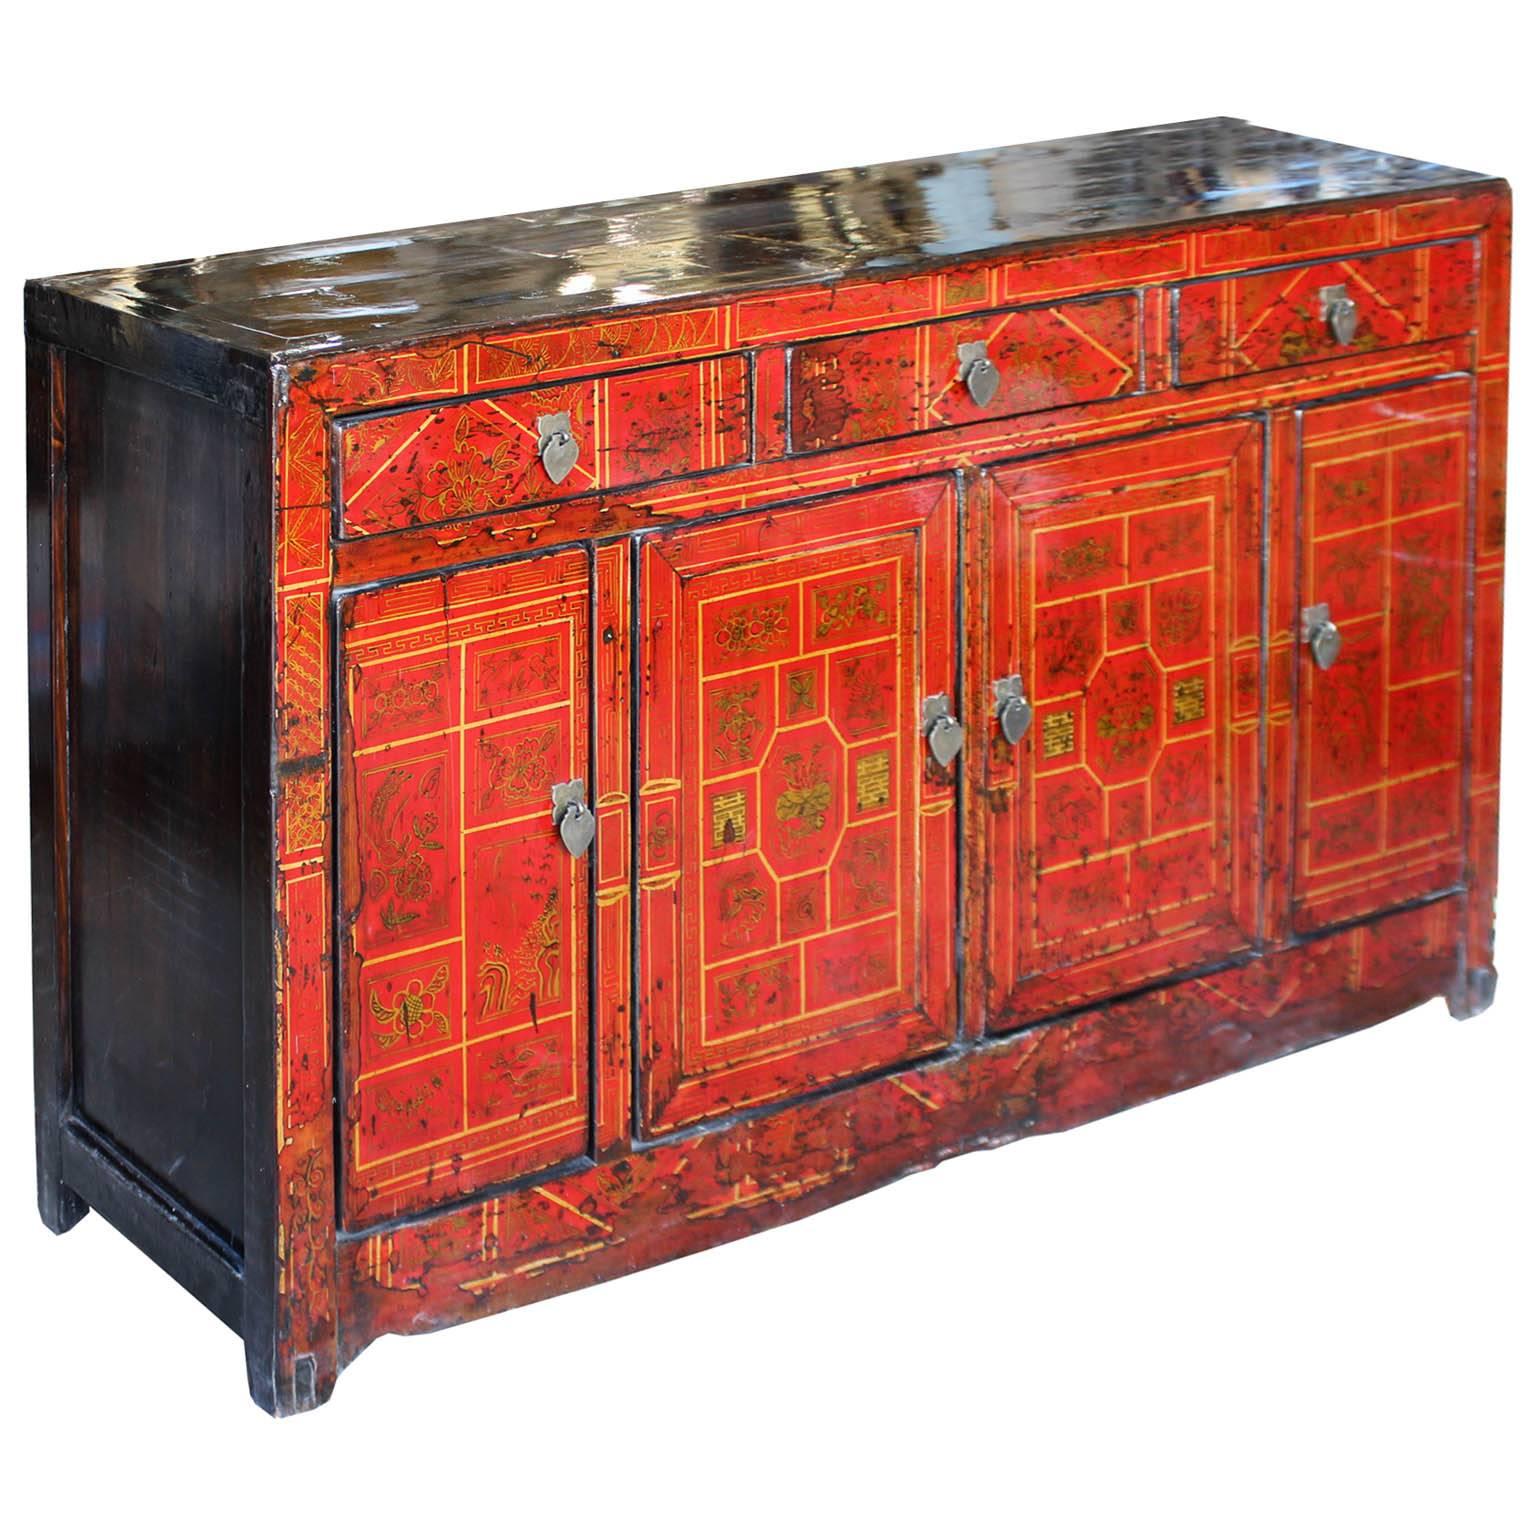 Red sideboard with hand-painted gold symbols for happiness and prosperity would be a statement piece in a living or dining room. Brown elmwood tone top and sides. Middle bar removes for easy interior access, with new interior shelf and hardware.